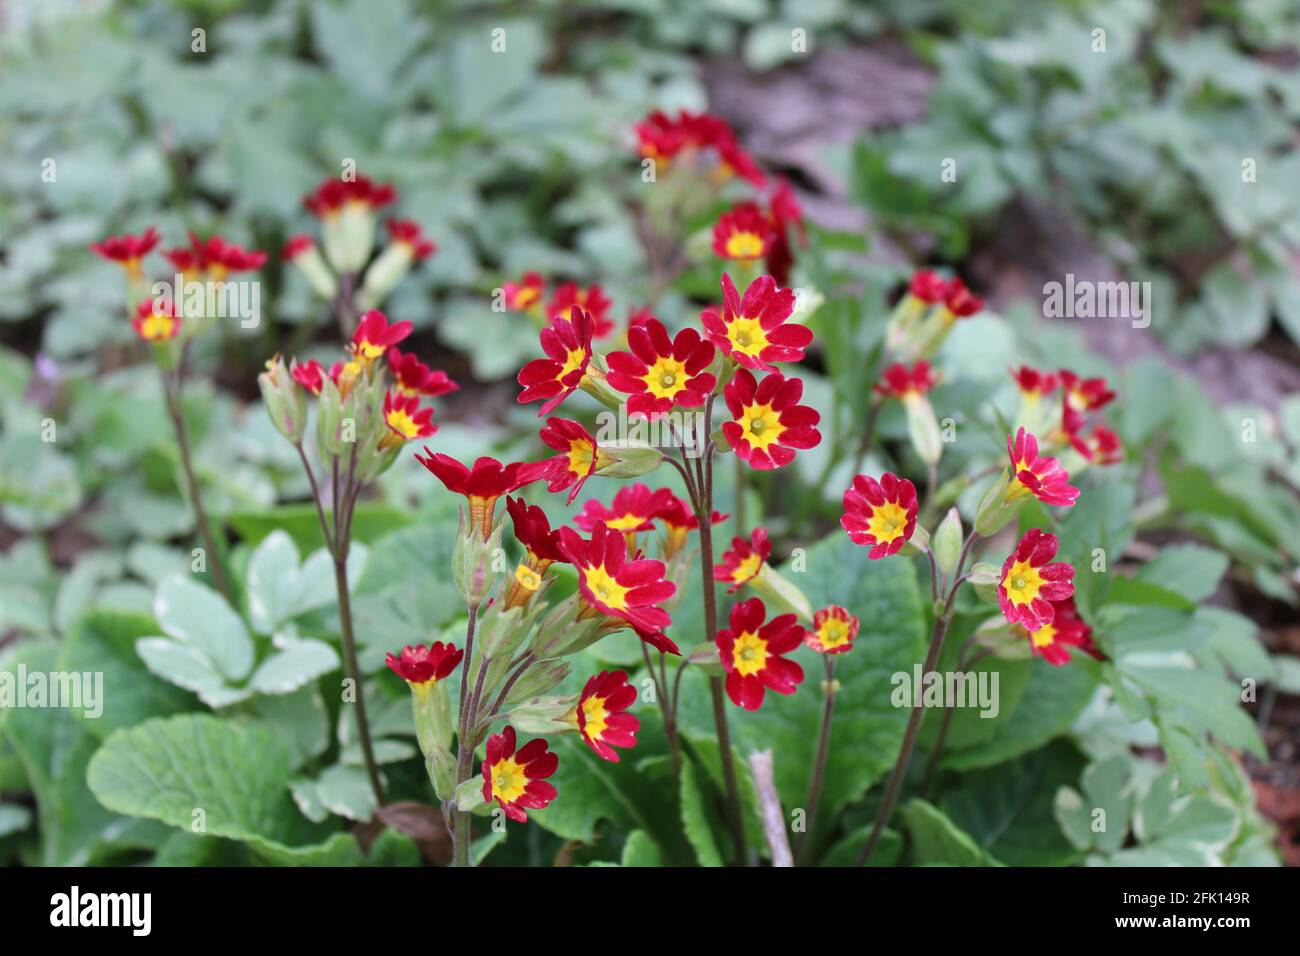 A Patch of Red and Yellow Oxlip Primrose Stock Photo